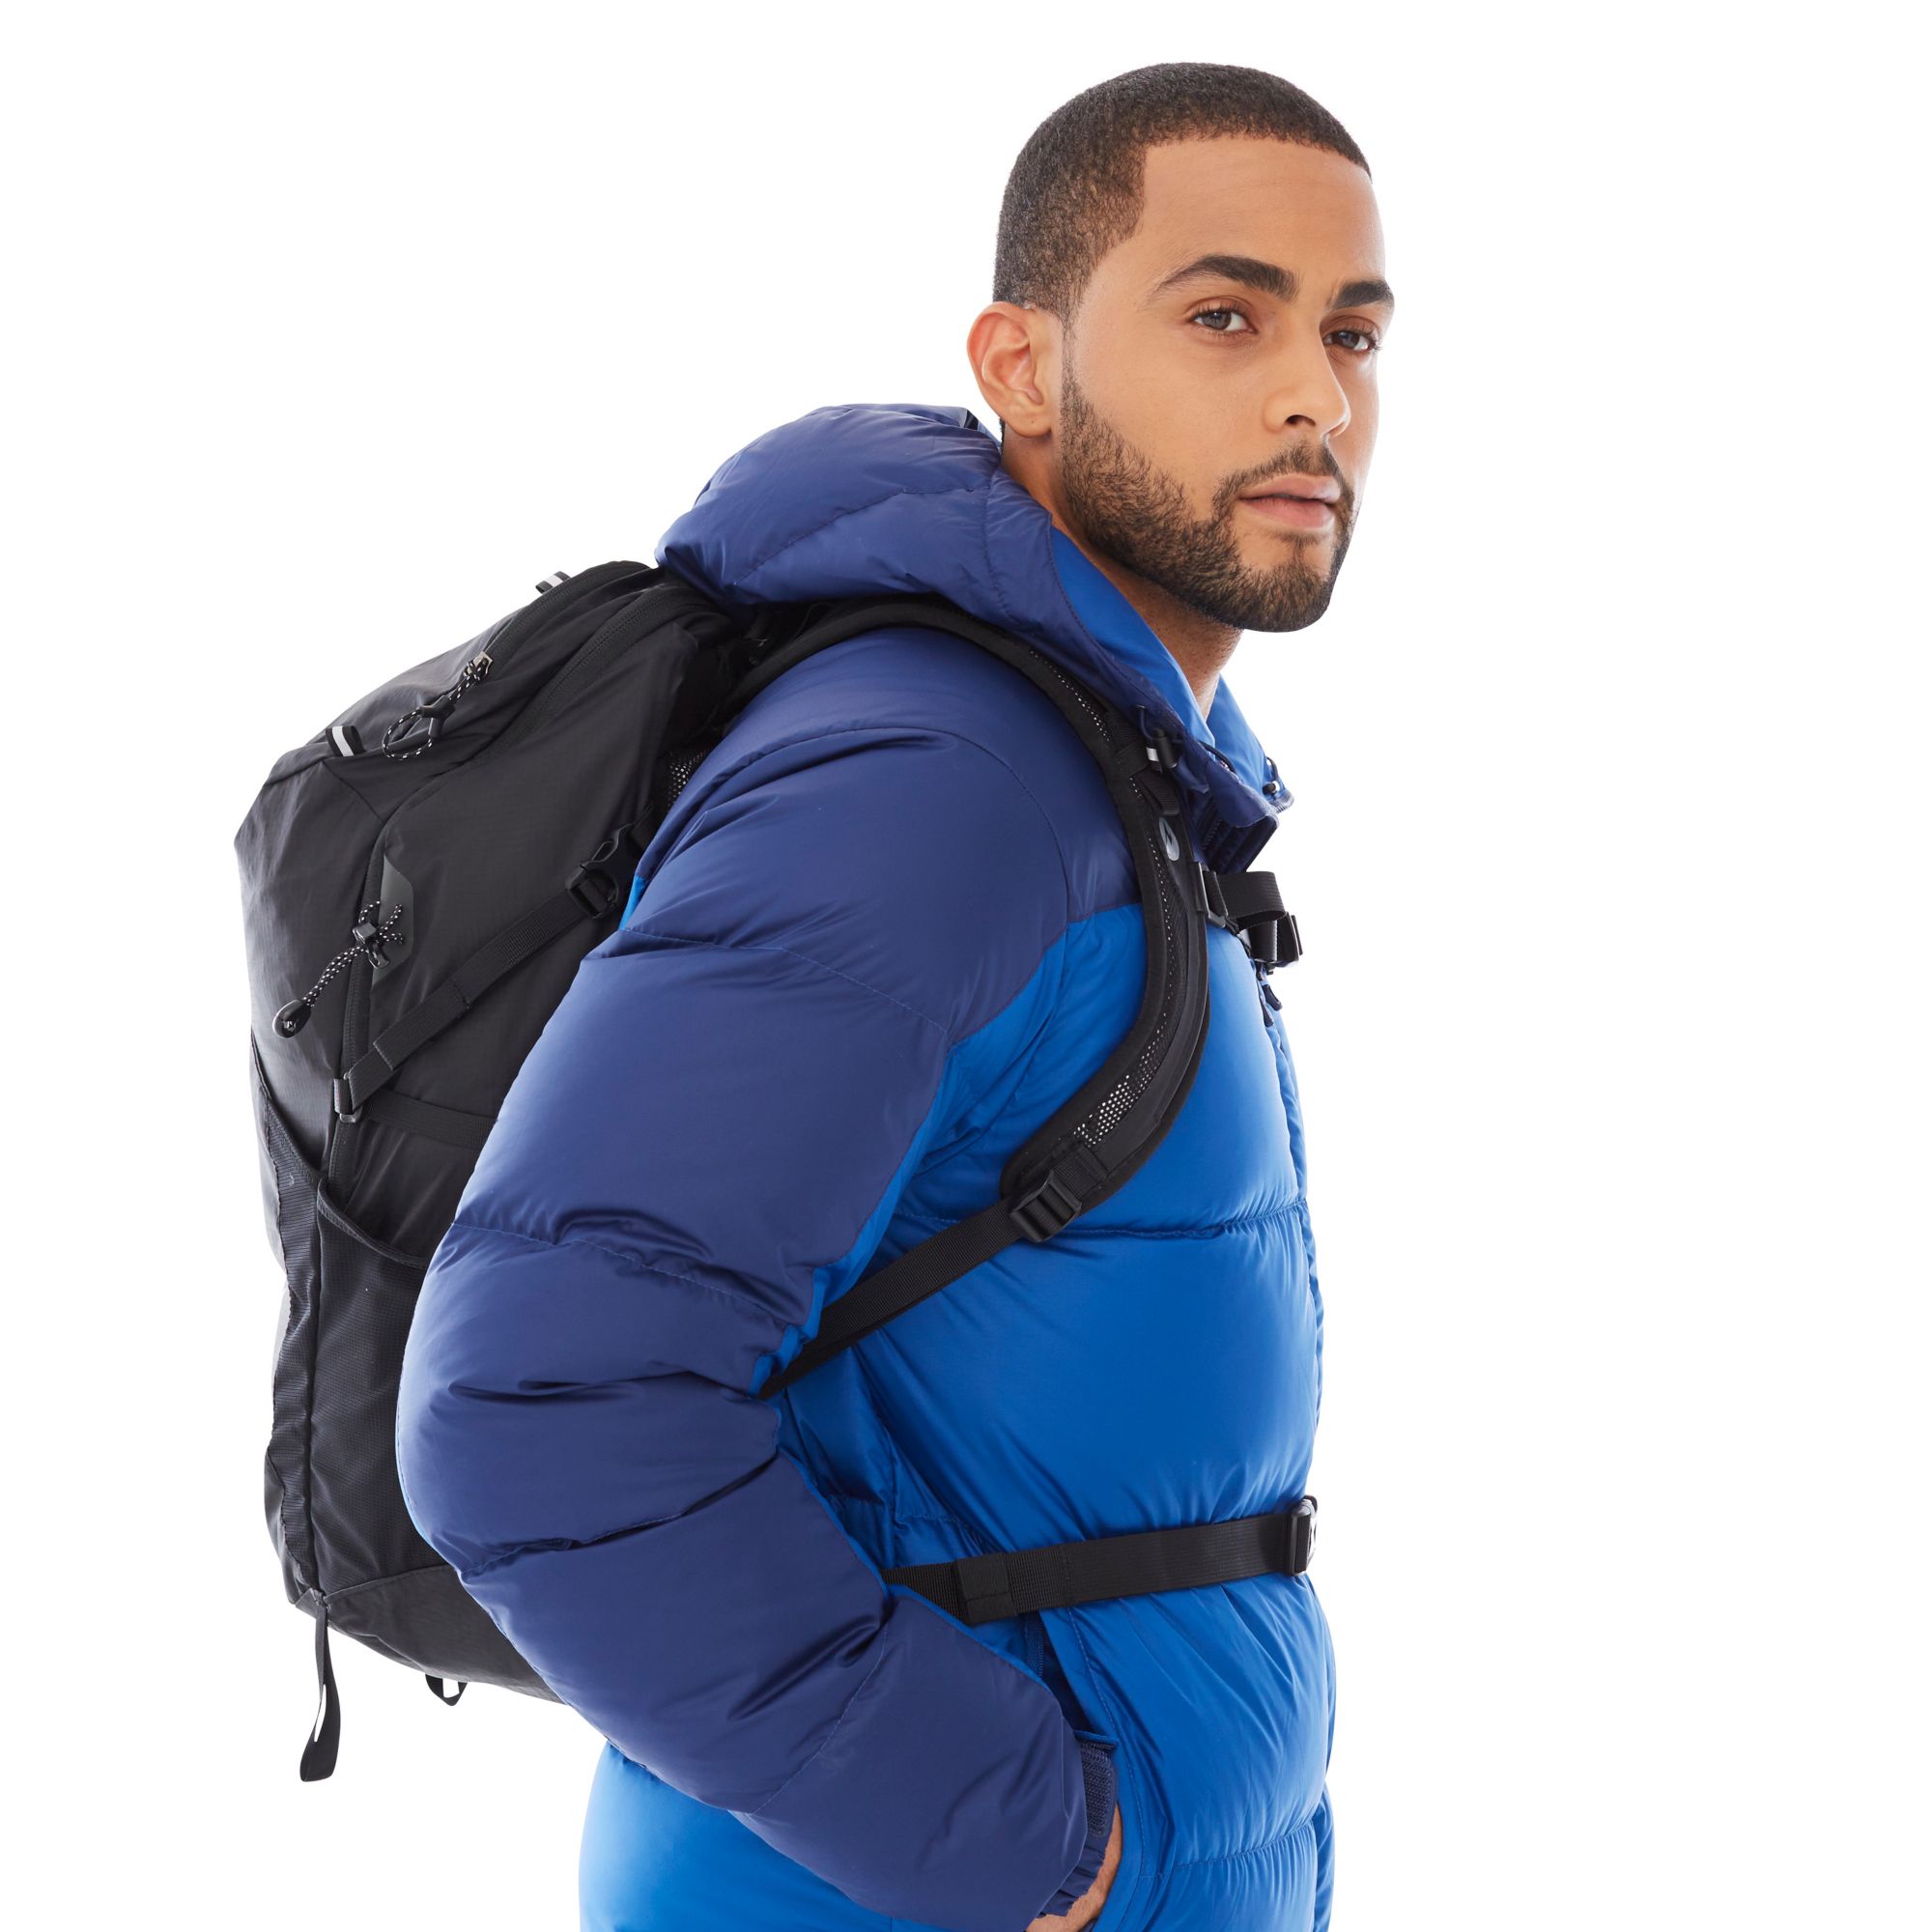 marmot guides down hooded jacket